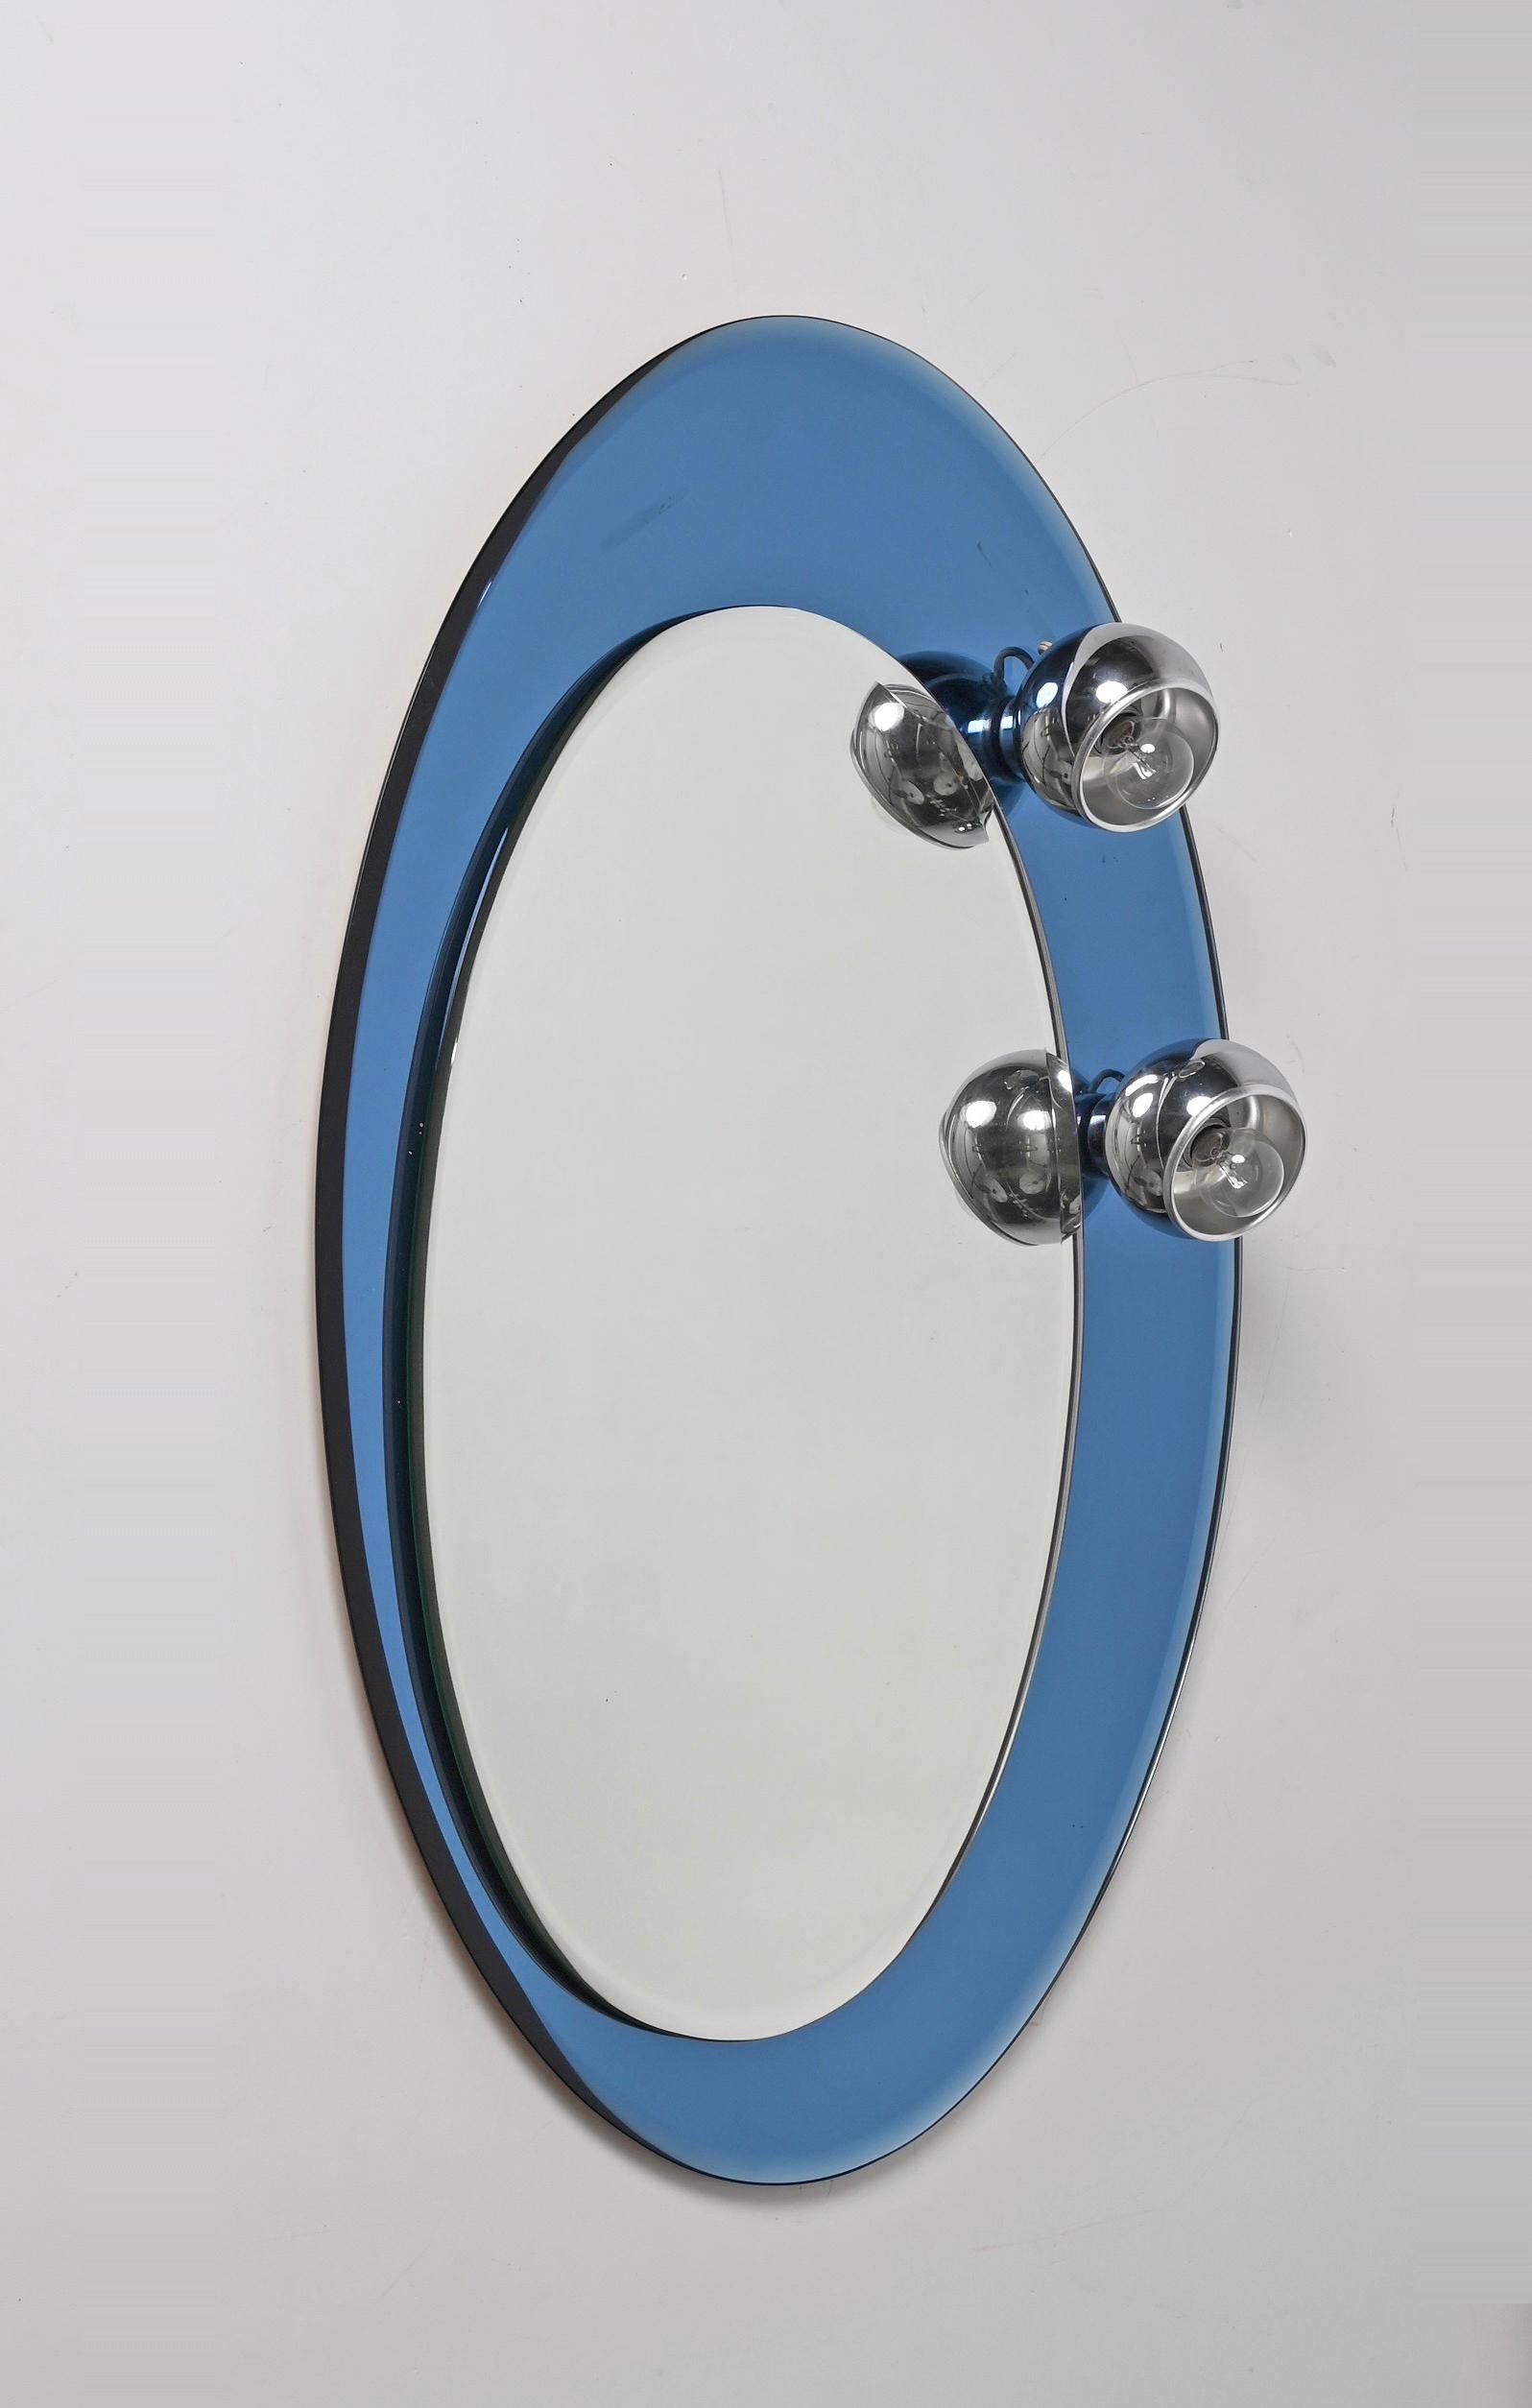 Midcentury Oval Wall Mirror with Blue Glass Frame and Magnetic Lights Italy 1960 For Sale 1